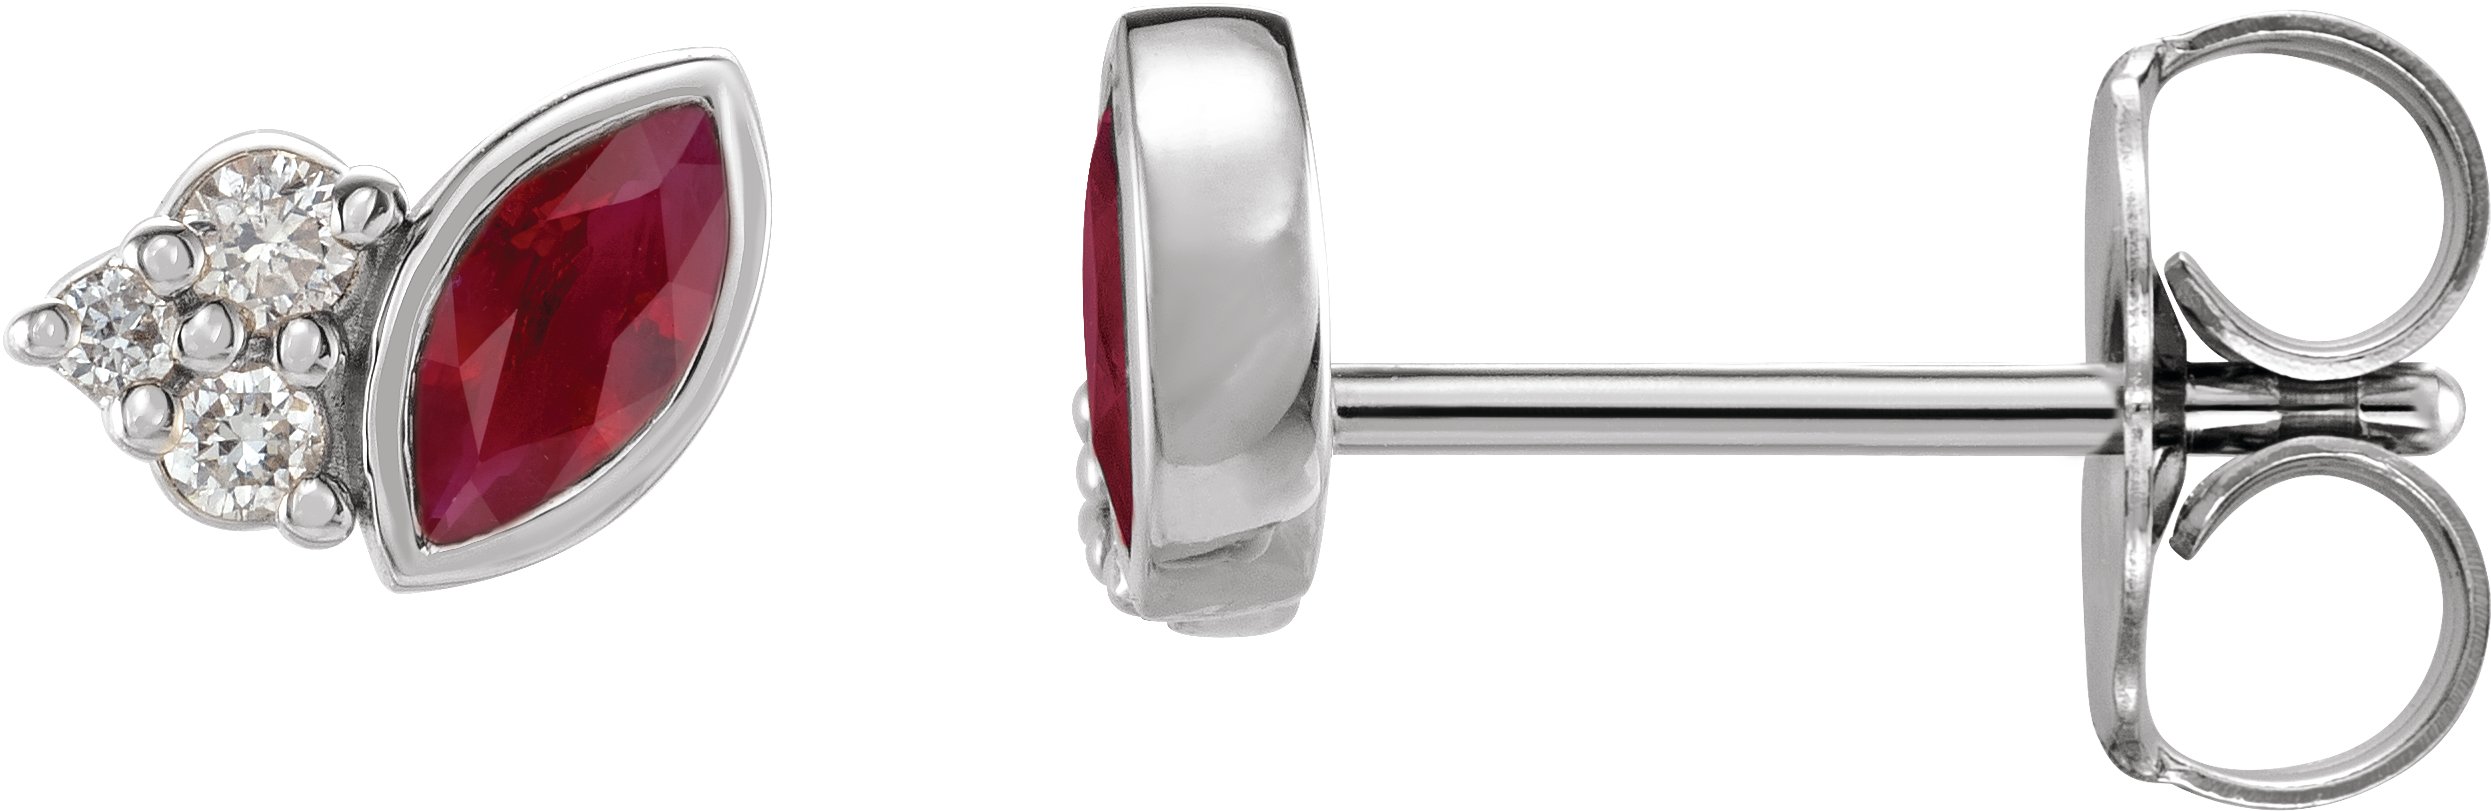 Sterling Silver Chatham Lab Created Ruby and .05 CTW Diamond Earrings Ref. 16501437